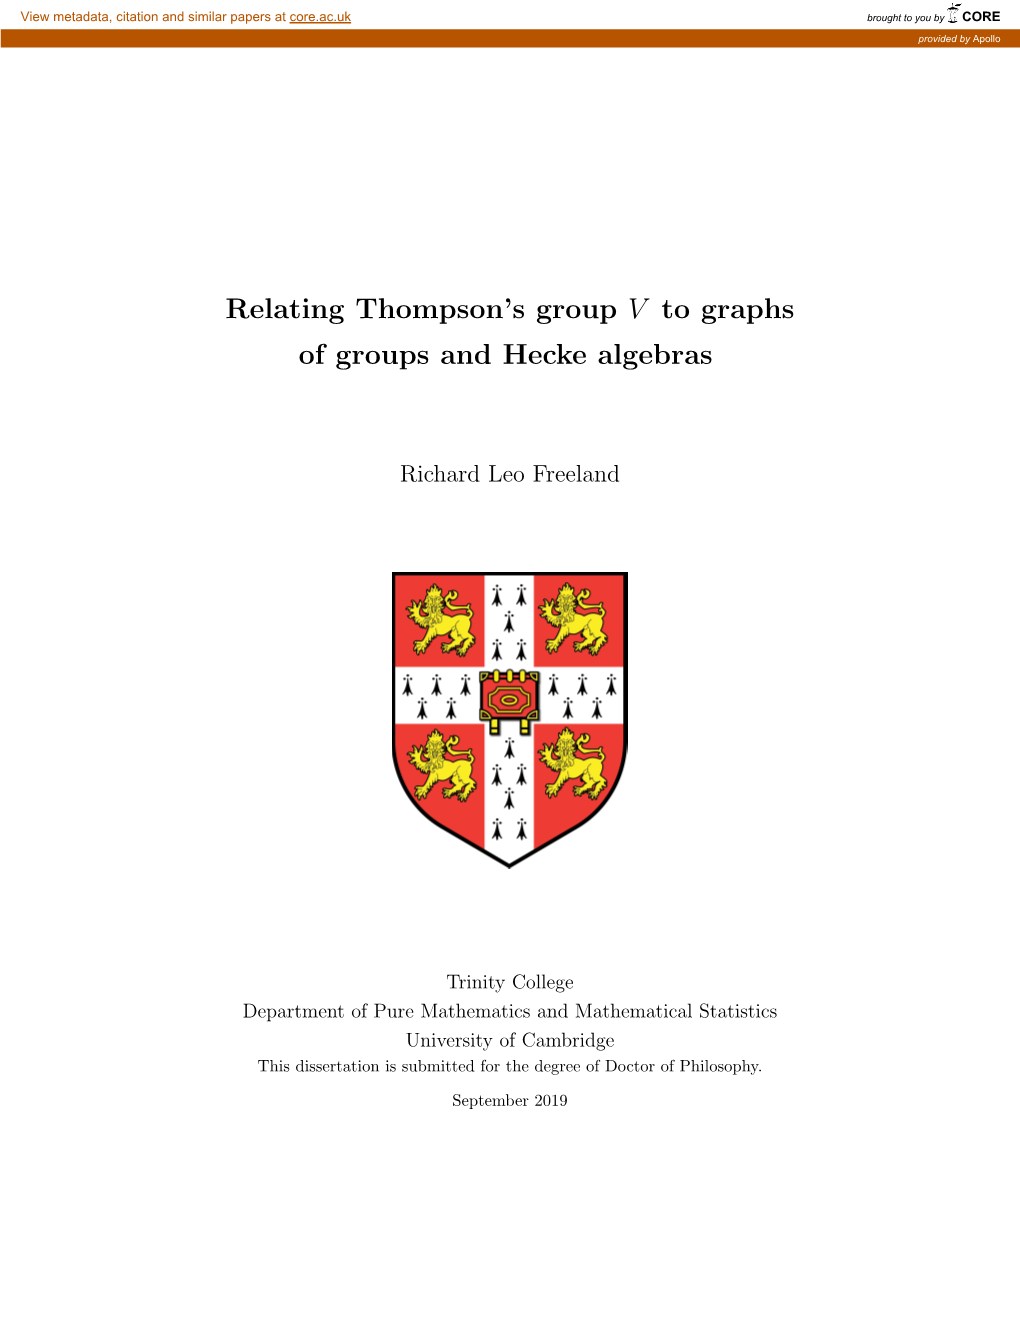 Relating Thompson's Group V to Graphs of Groups and Hecke Algebras